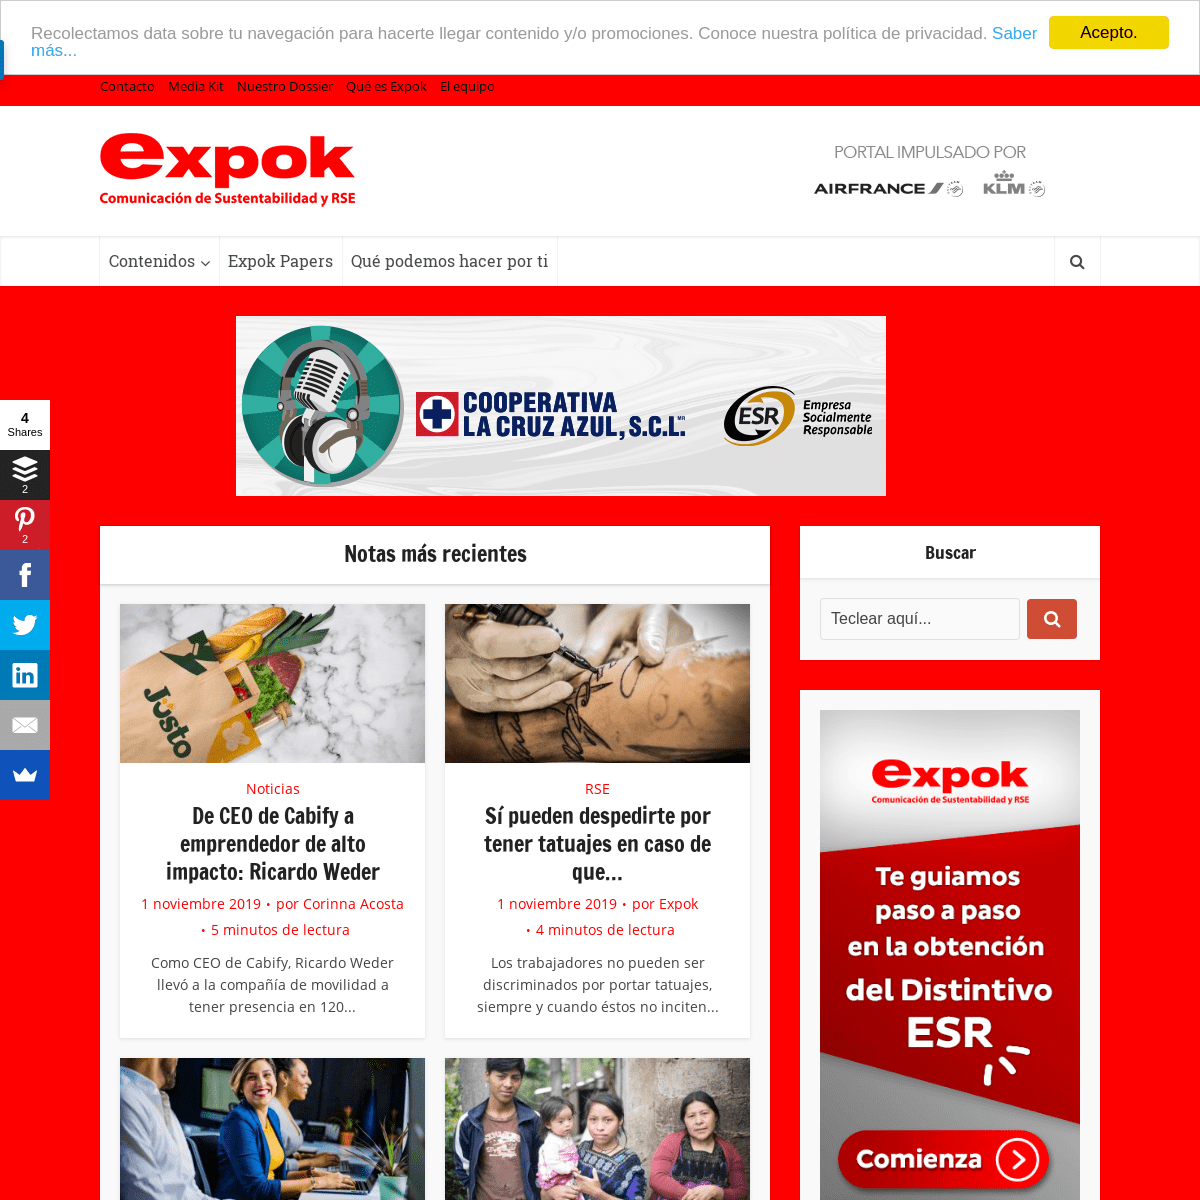 A complete backup of expoknews.com